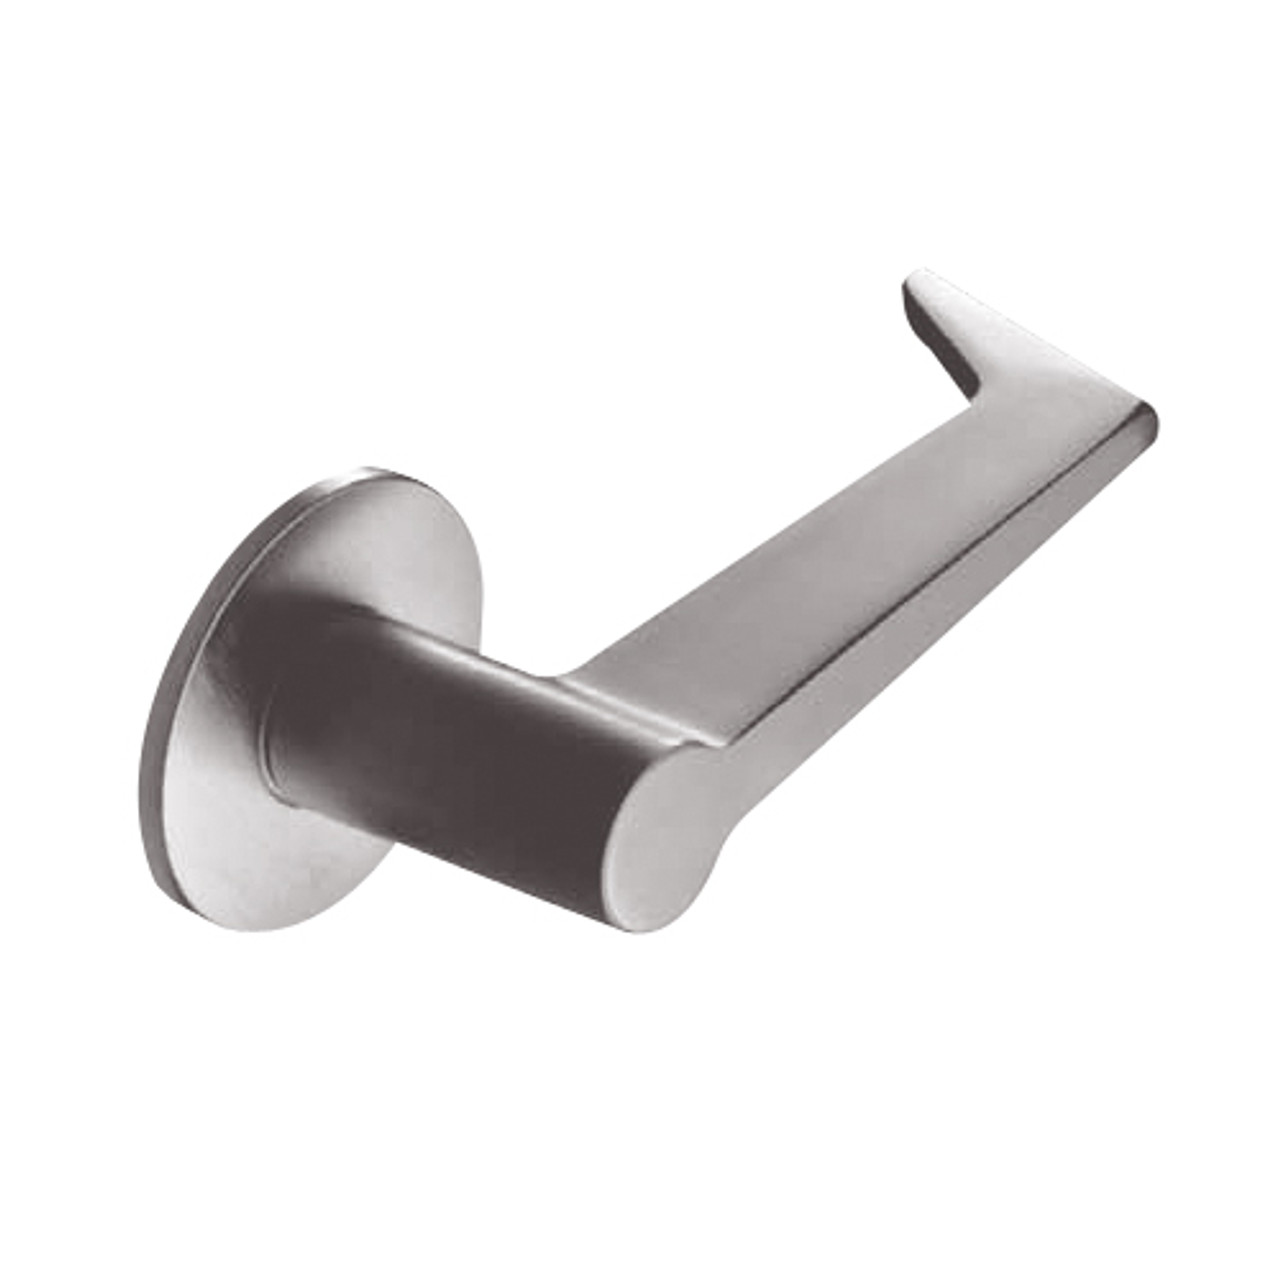 ML2069-ESB-629-M31 Corbin Russwin ML2000 Series Mortise Institution Privacy Trim Pack with Essex Lever in Bright Stainless Steel